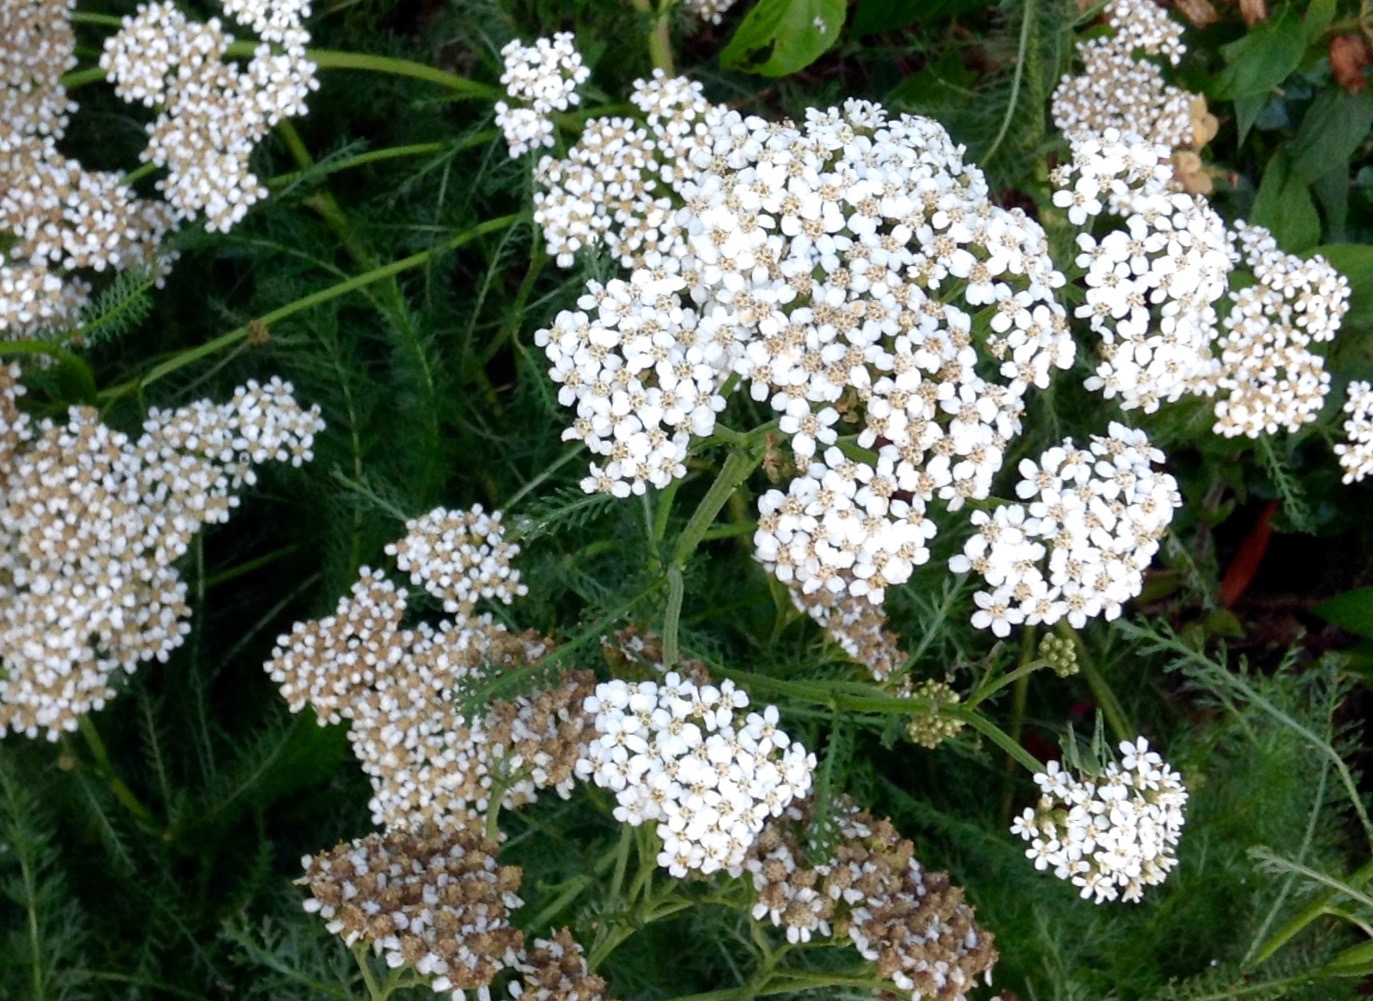 Yarrow: Weed or Medicine For The Soil and Our Bodies? - Our ...